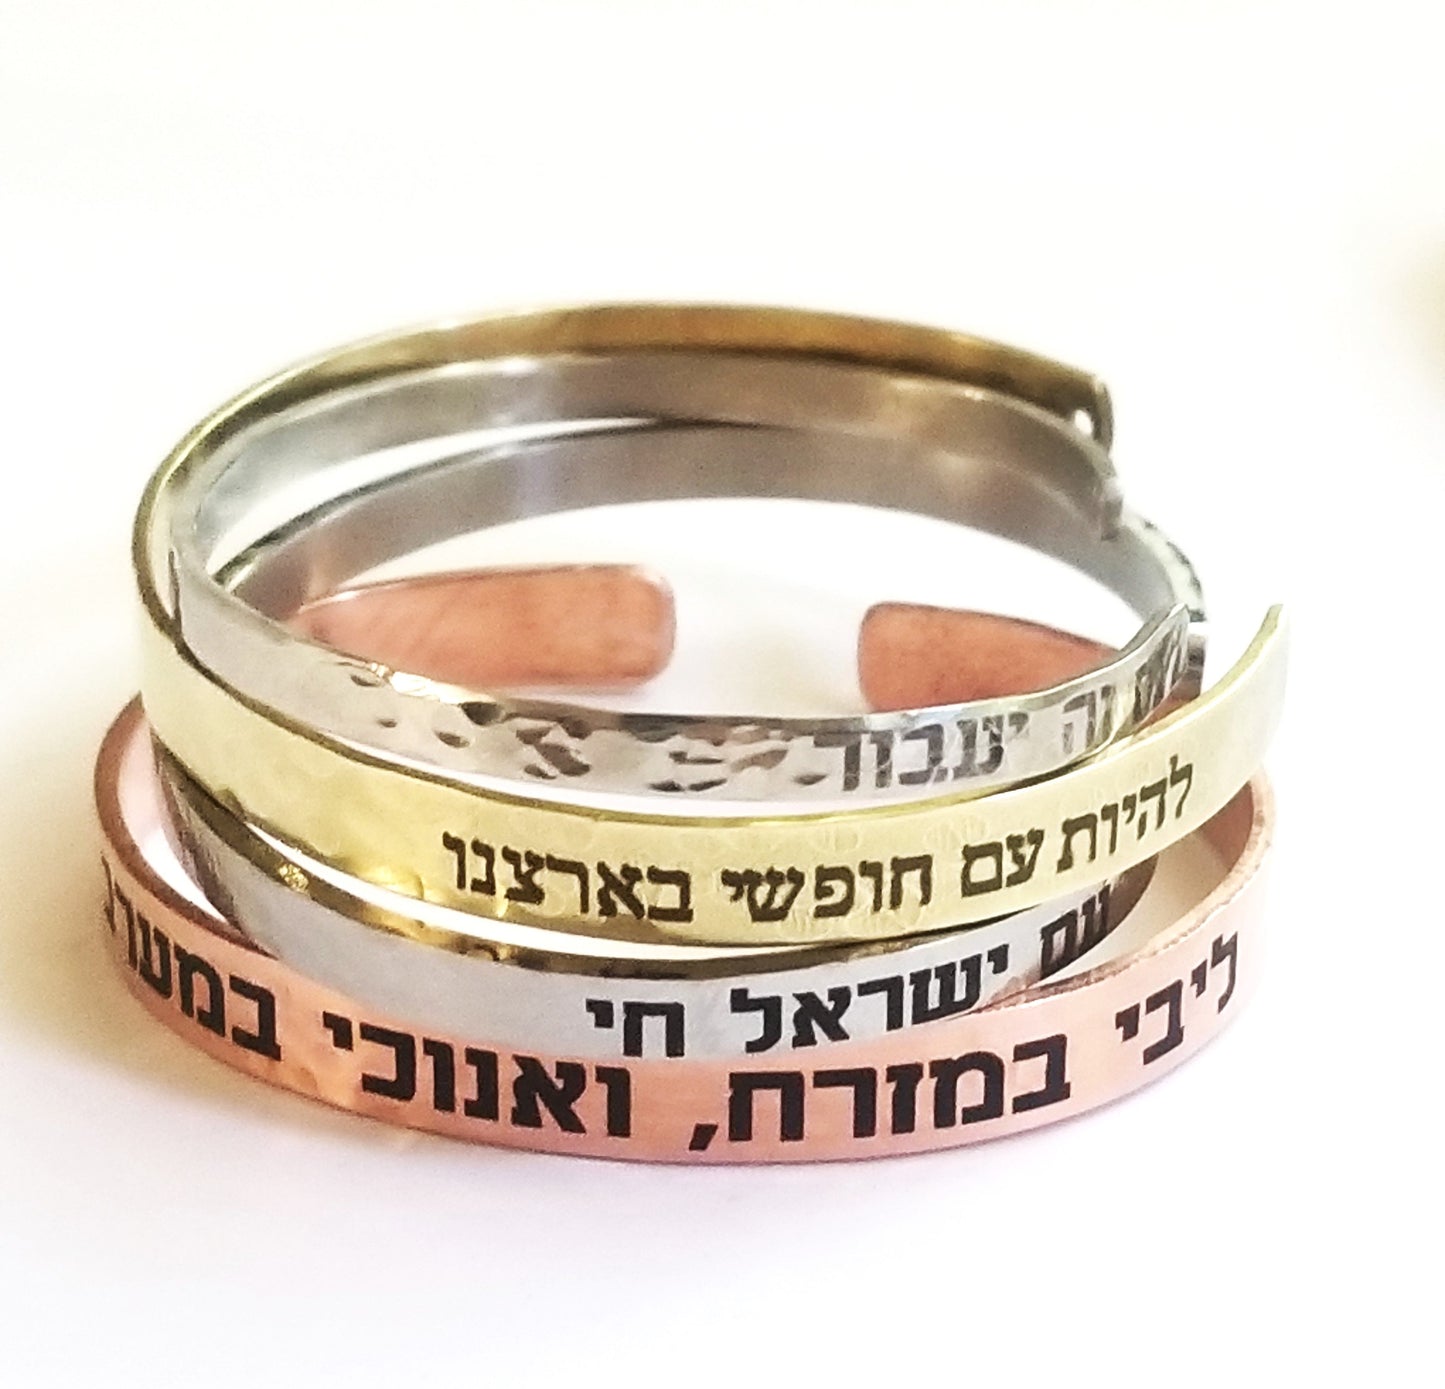 Hatikvah quote cuff, Hebrew bracelet, Engraved Brass bangle, Support Israel Jewelry, Am Israel Chai, Jewish pride, Custome Judaica Gift